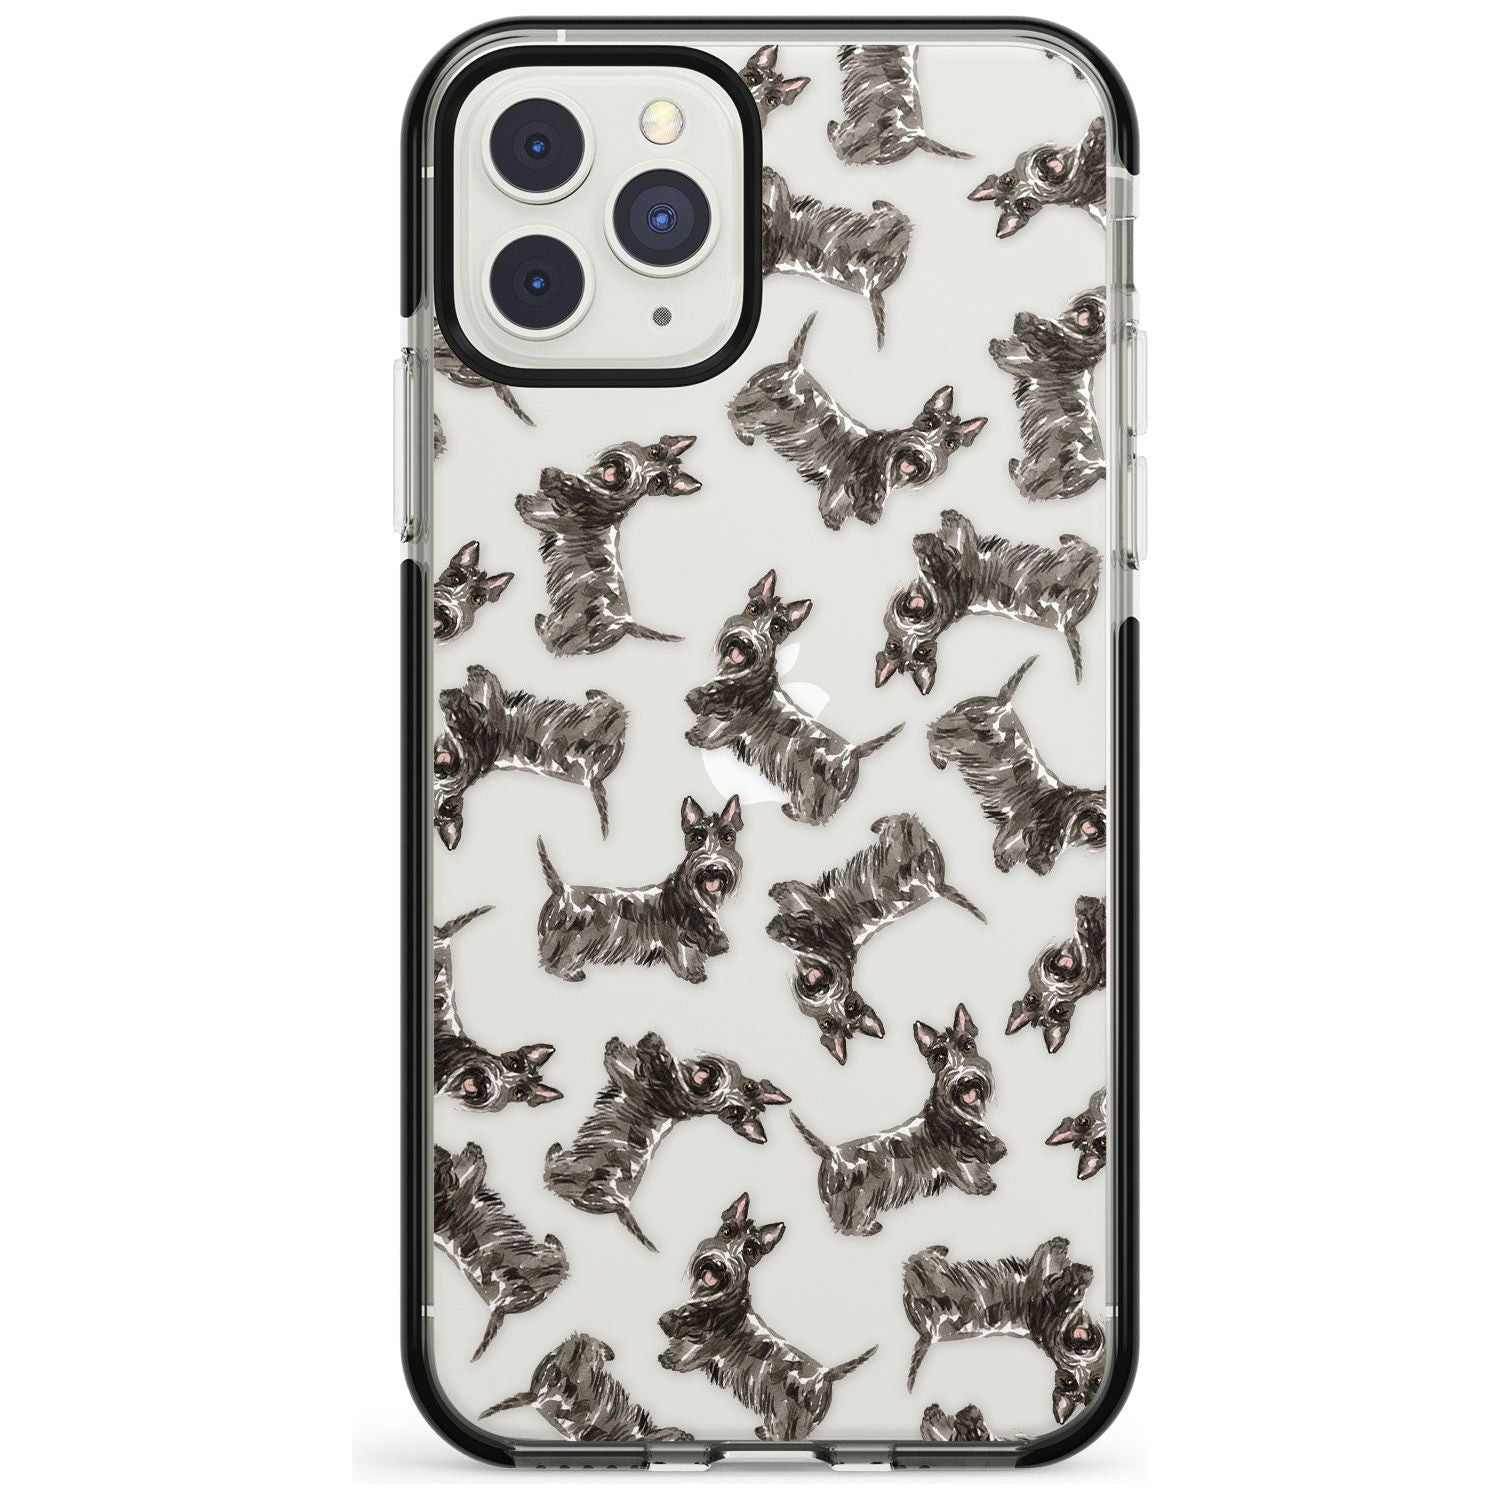 Scottish Terrier Watercolour Dog Pattern Black Impact Phone Case for iPhone 11 Pro Max